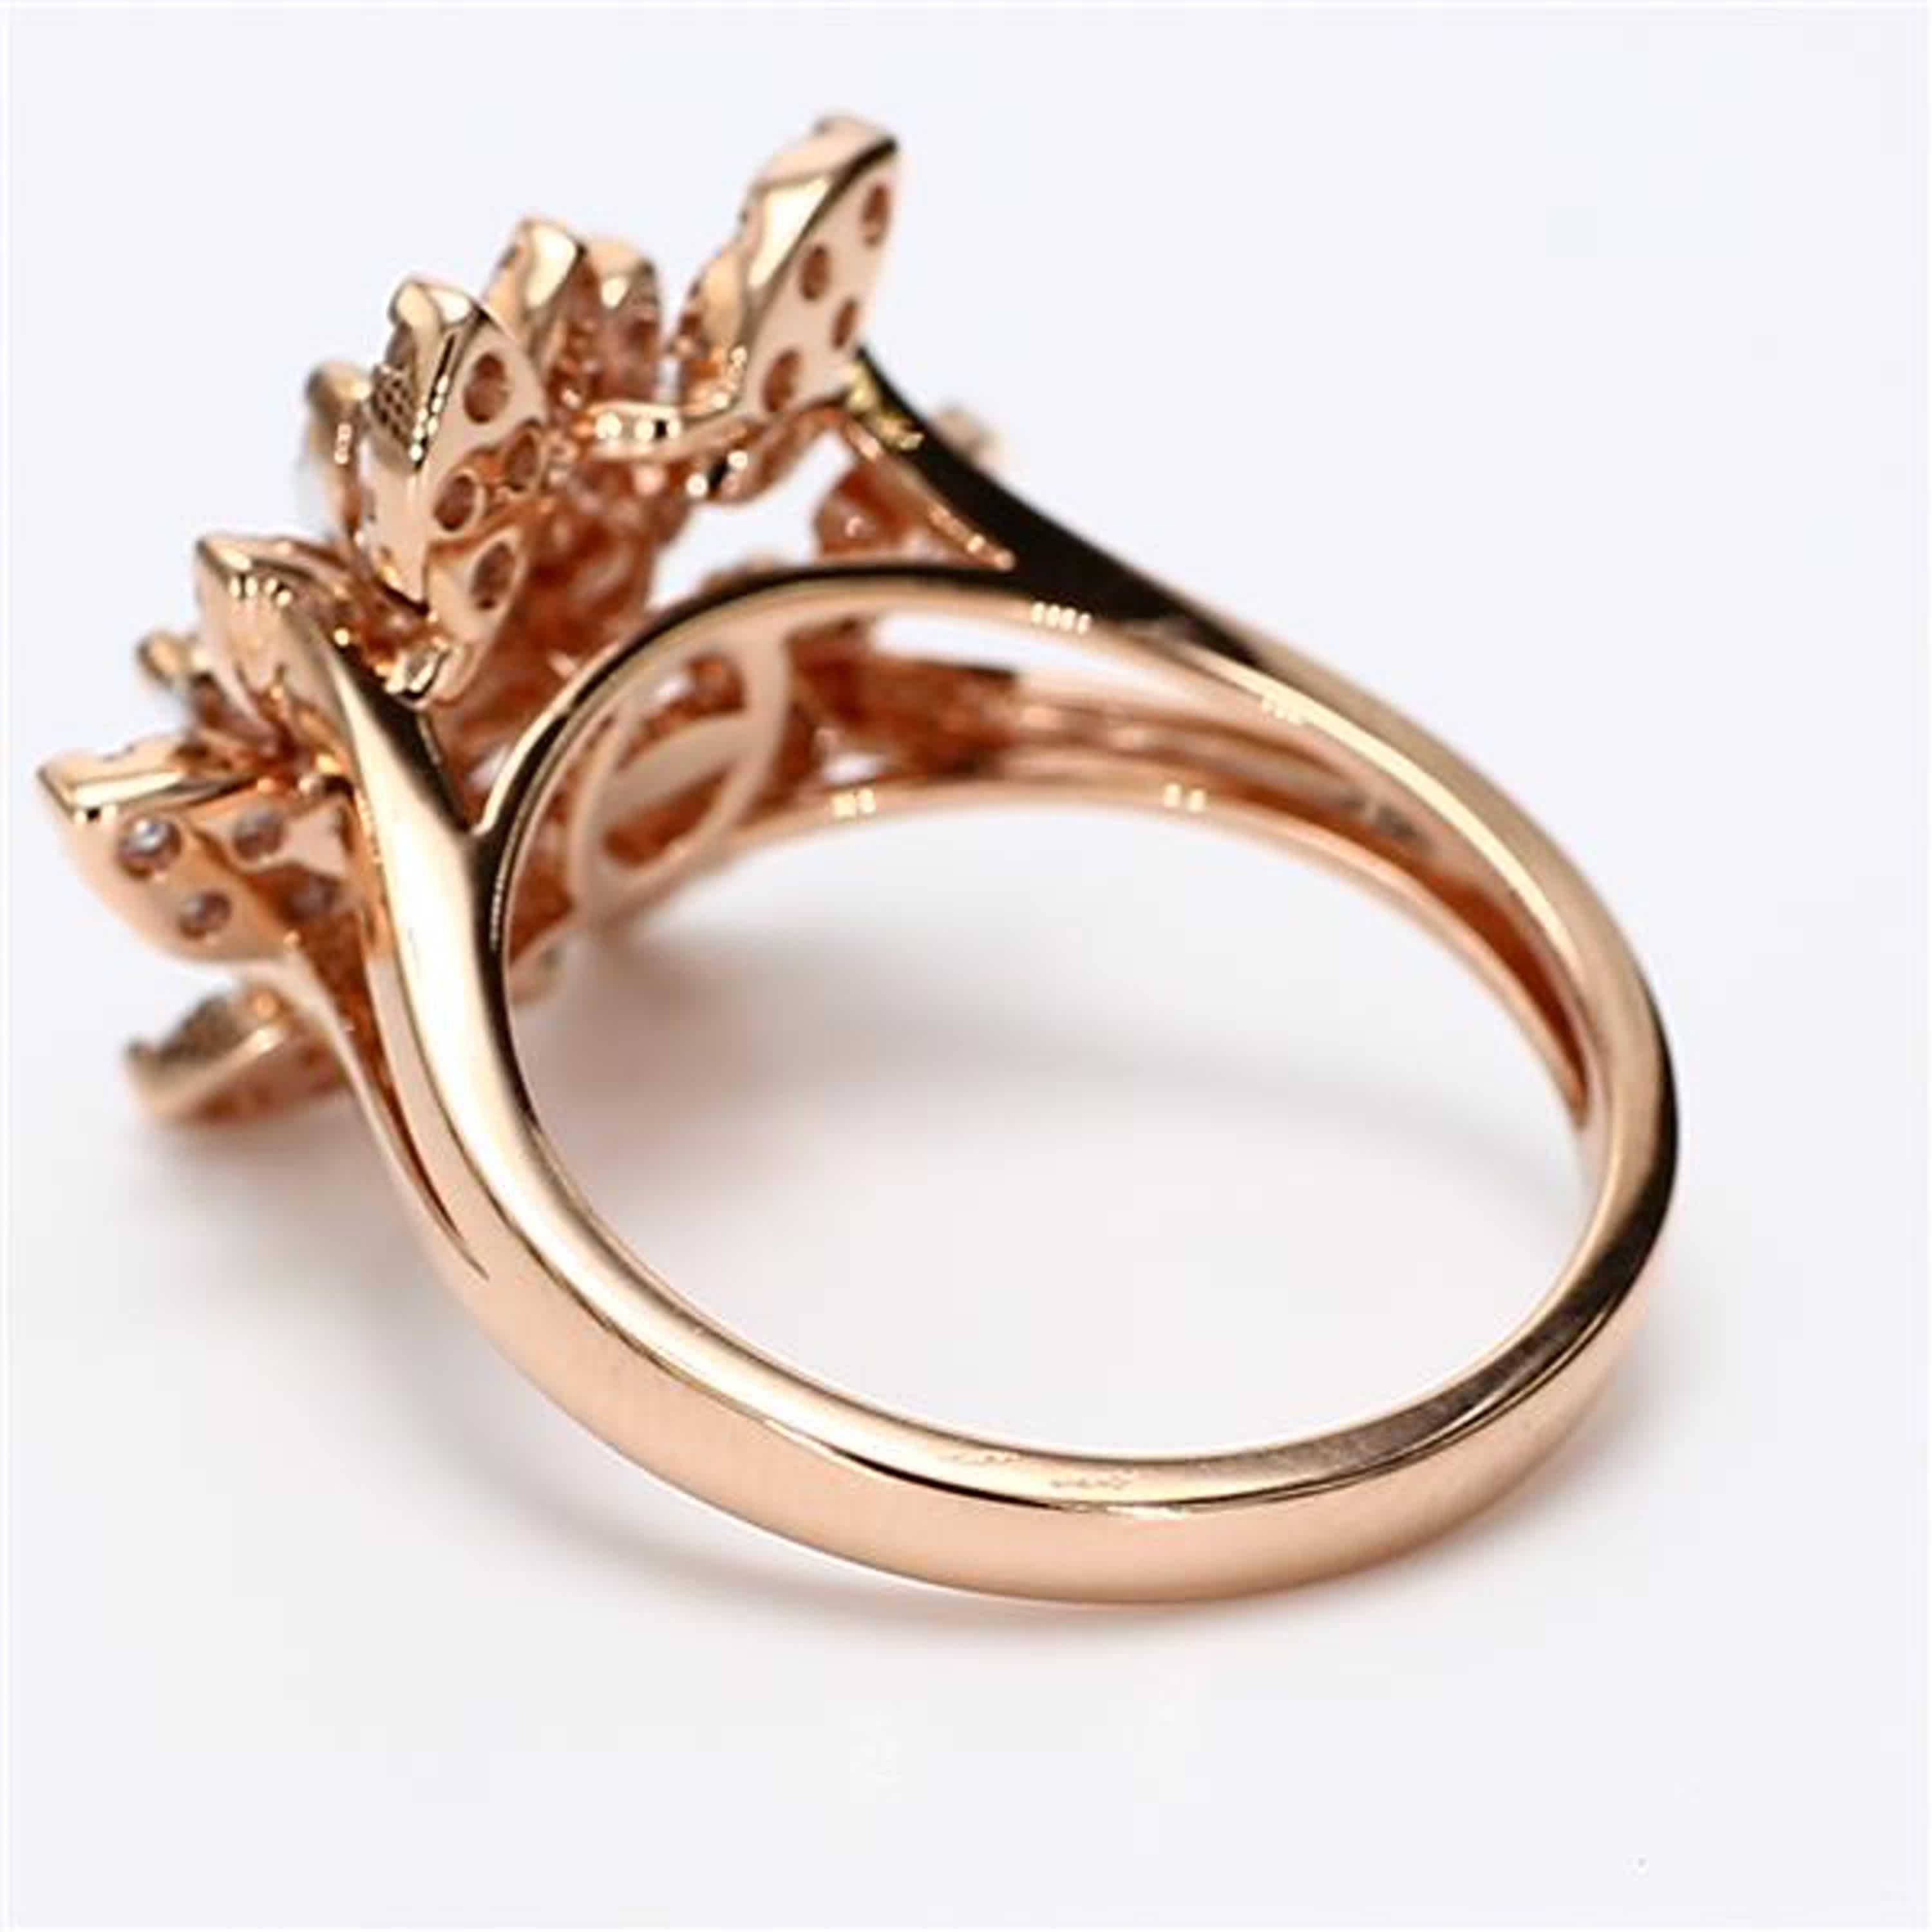 Round Cut Natural White Round Diamond 1.36 Carat TW Rose Gold Cocktail Ring For Sale